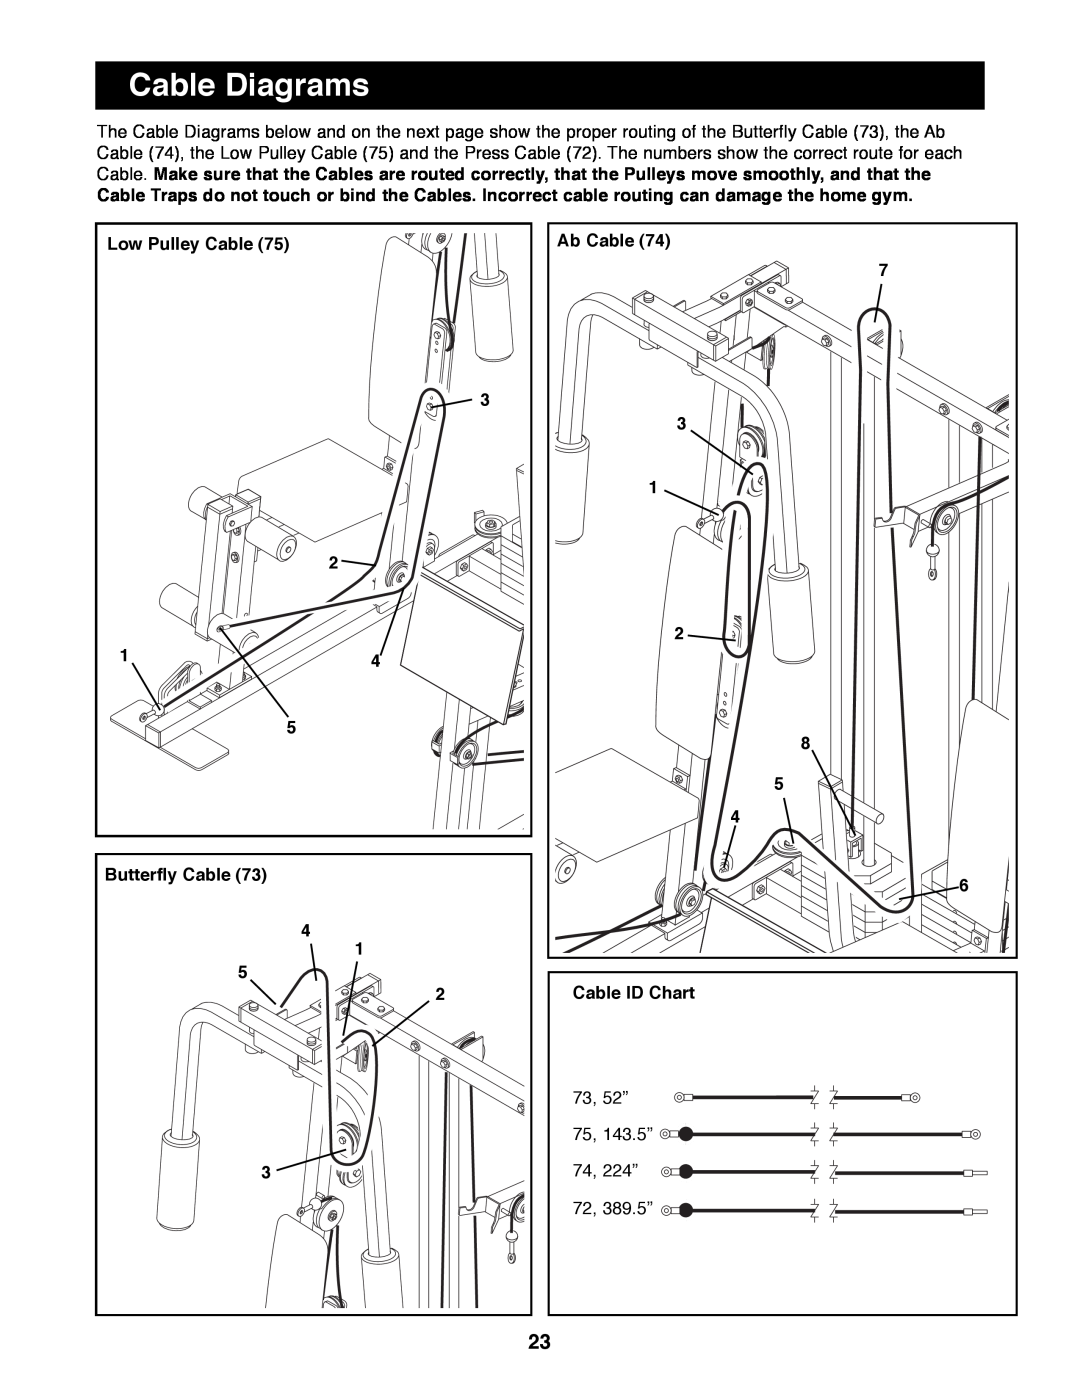 Weider WESY99490 manual Cable Diagrams, Low Pulley Cable, Ab Cable, Butterfly Cable, Cable ID Chart, 73, 52Ó, 75, 143.5Ó 